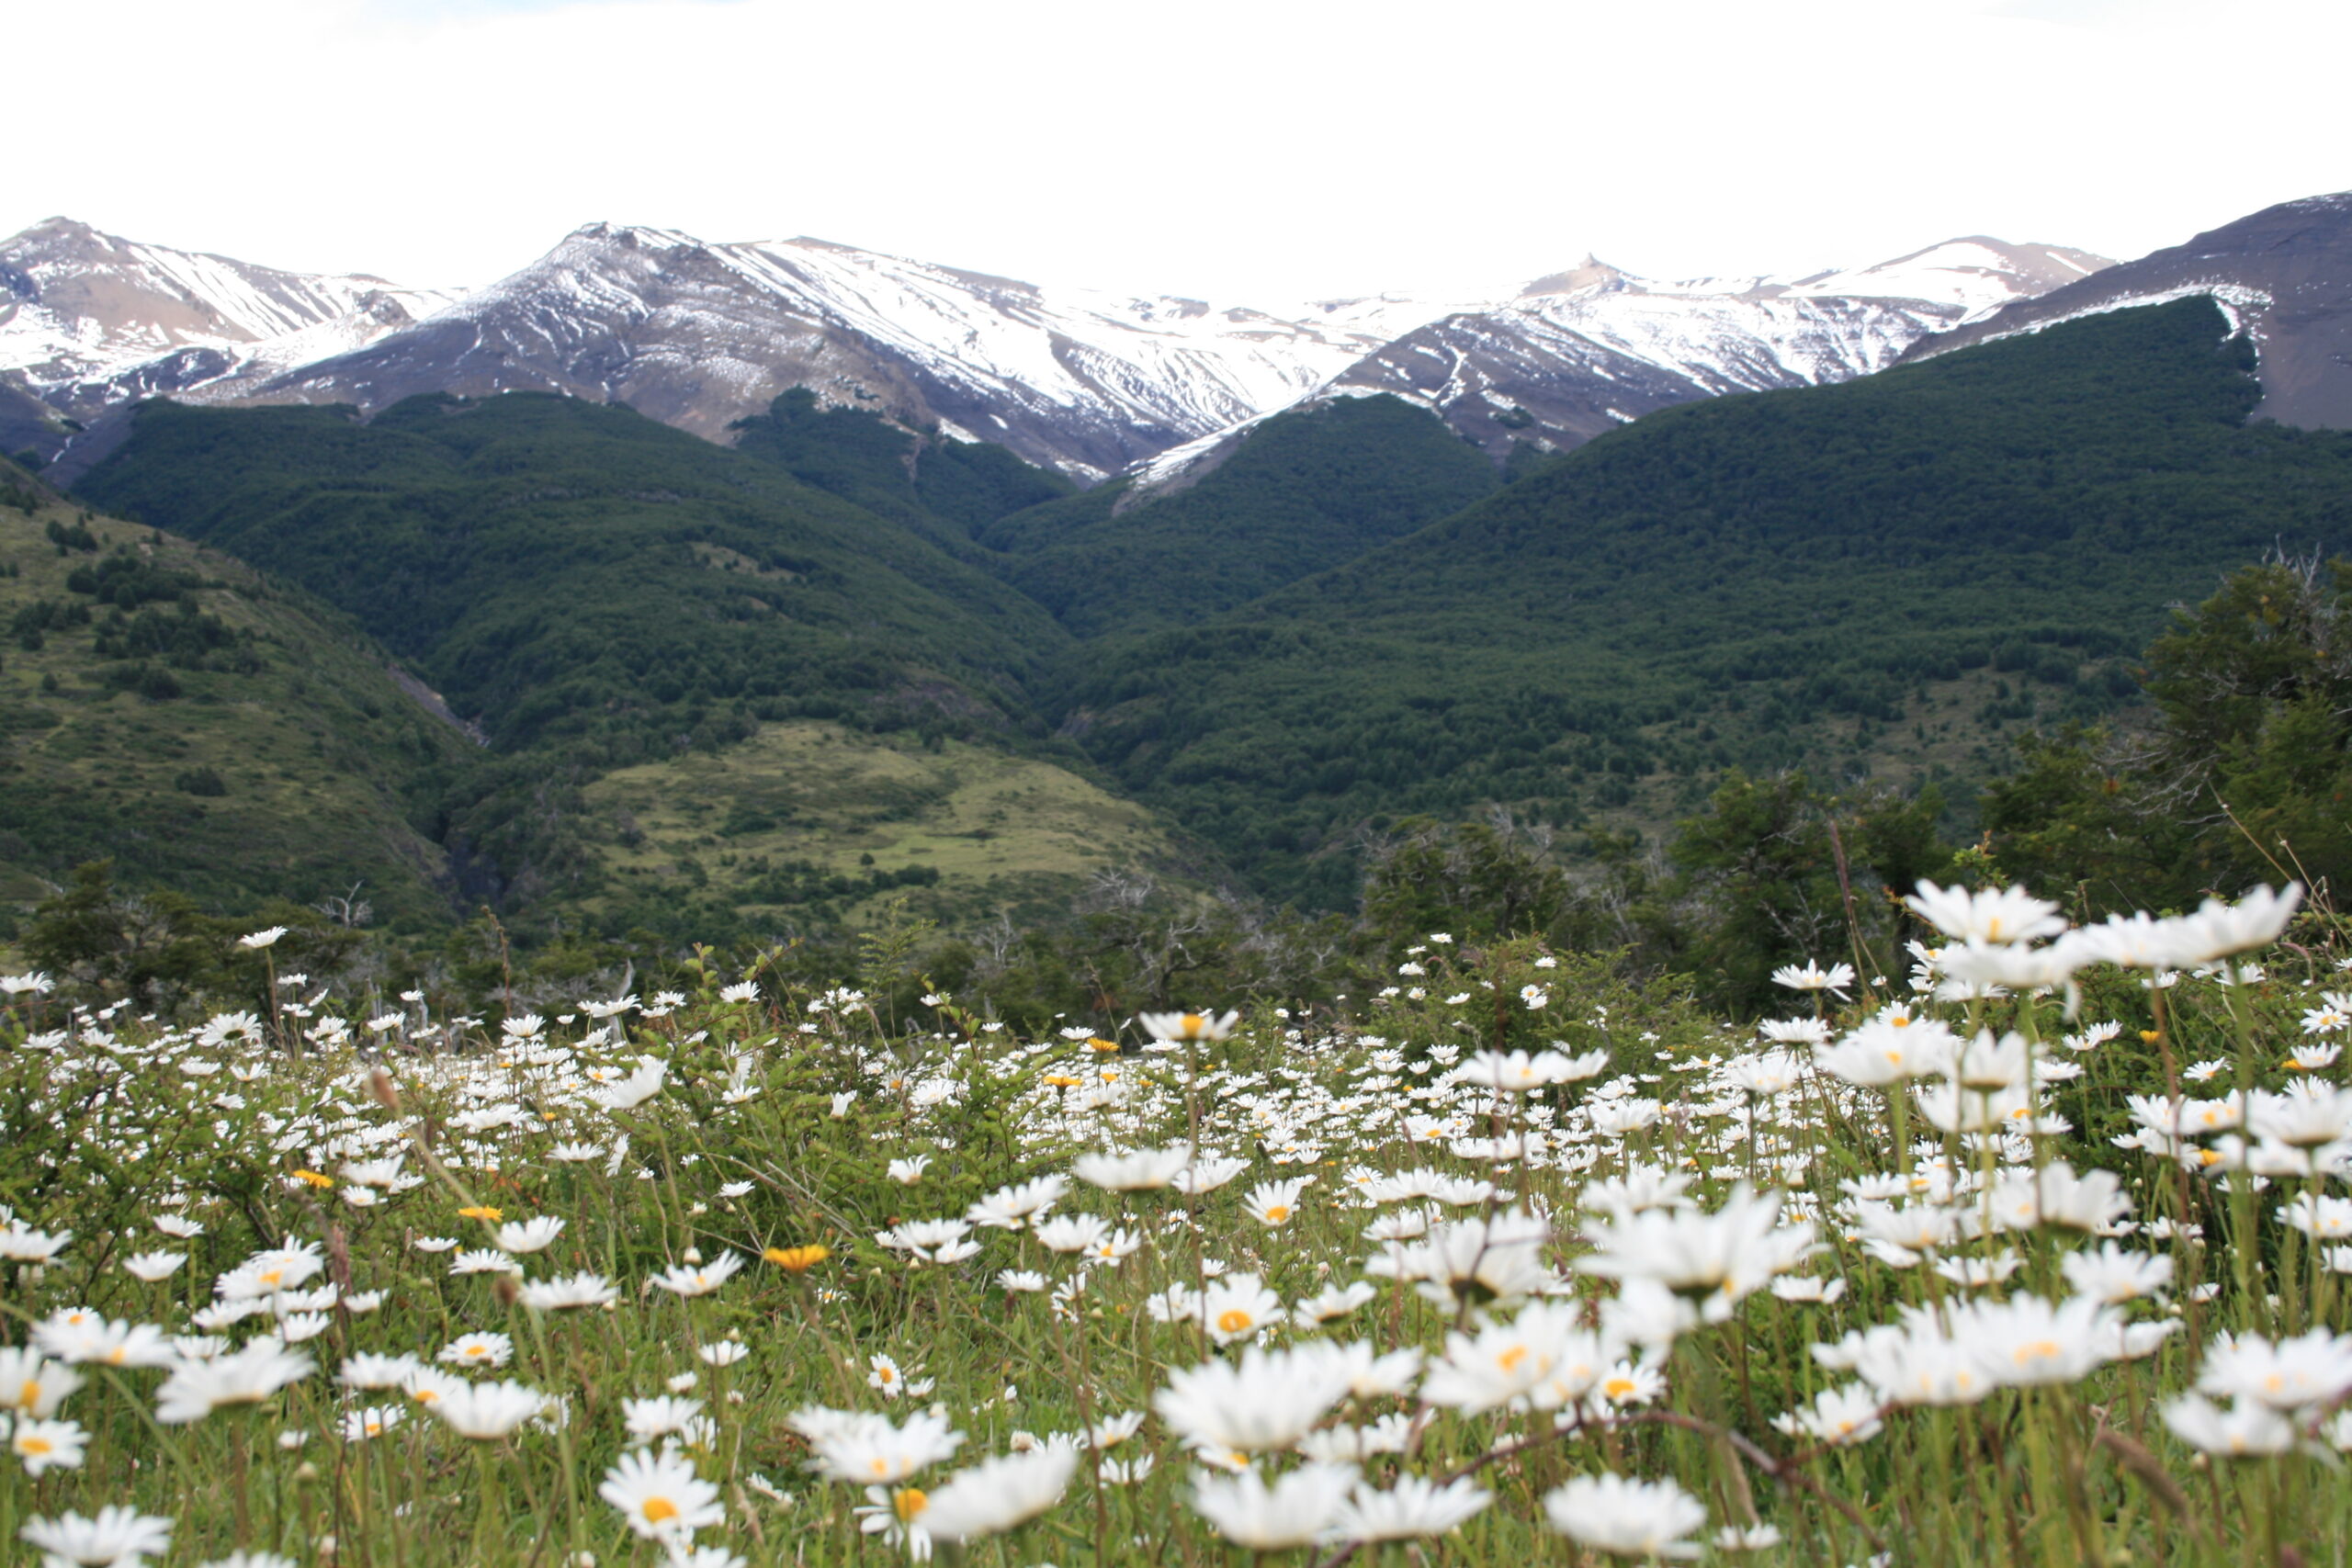 Kilometers of fields of daisies in Torres del Paine National Park in Chilean Patagonia.